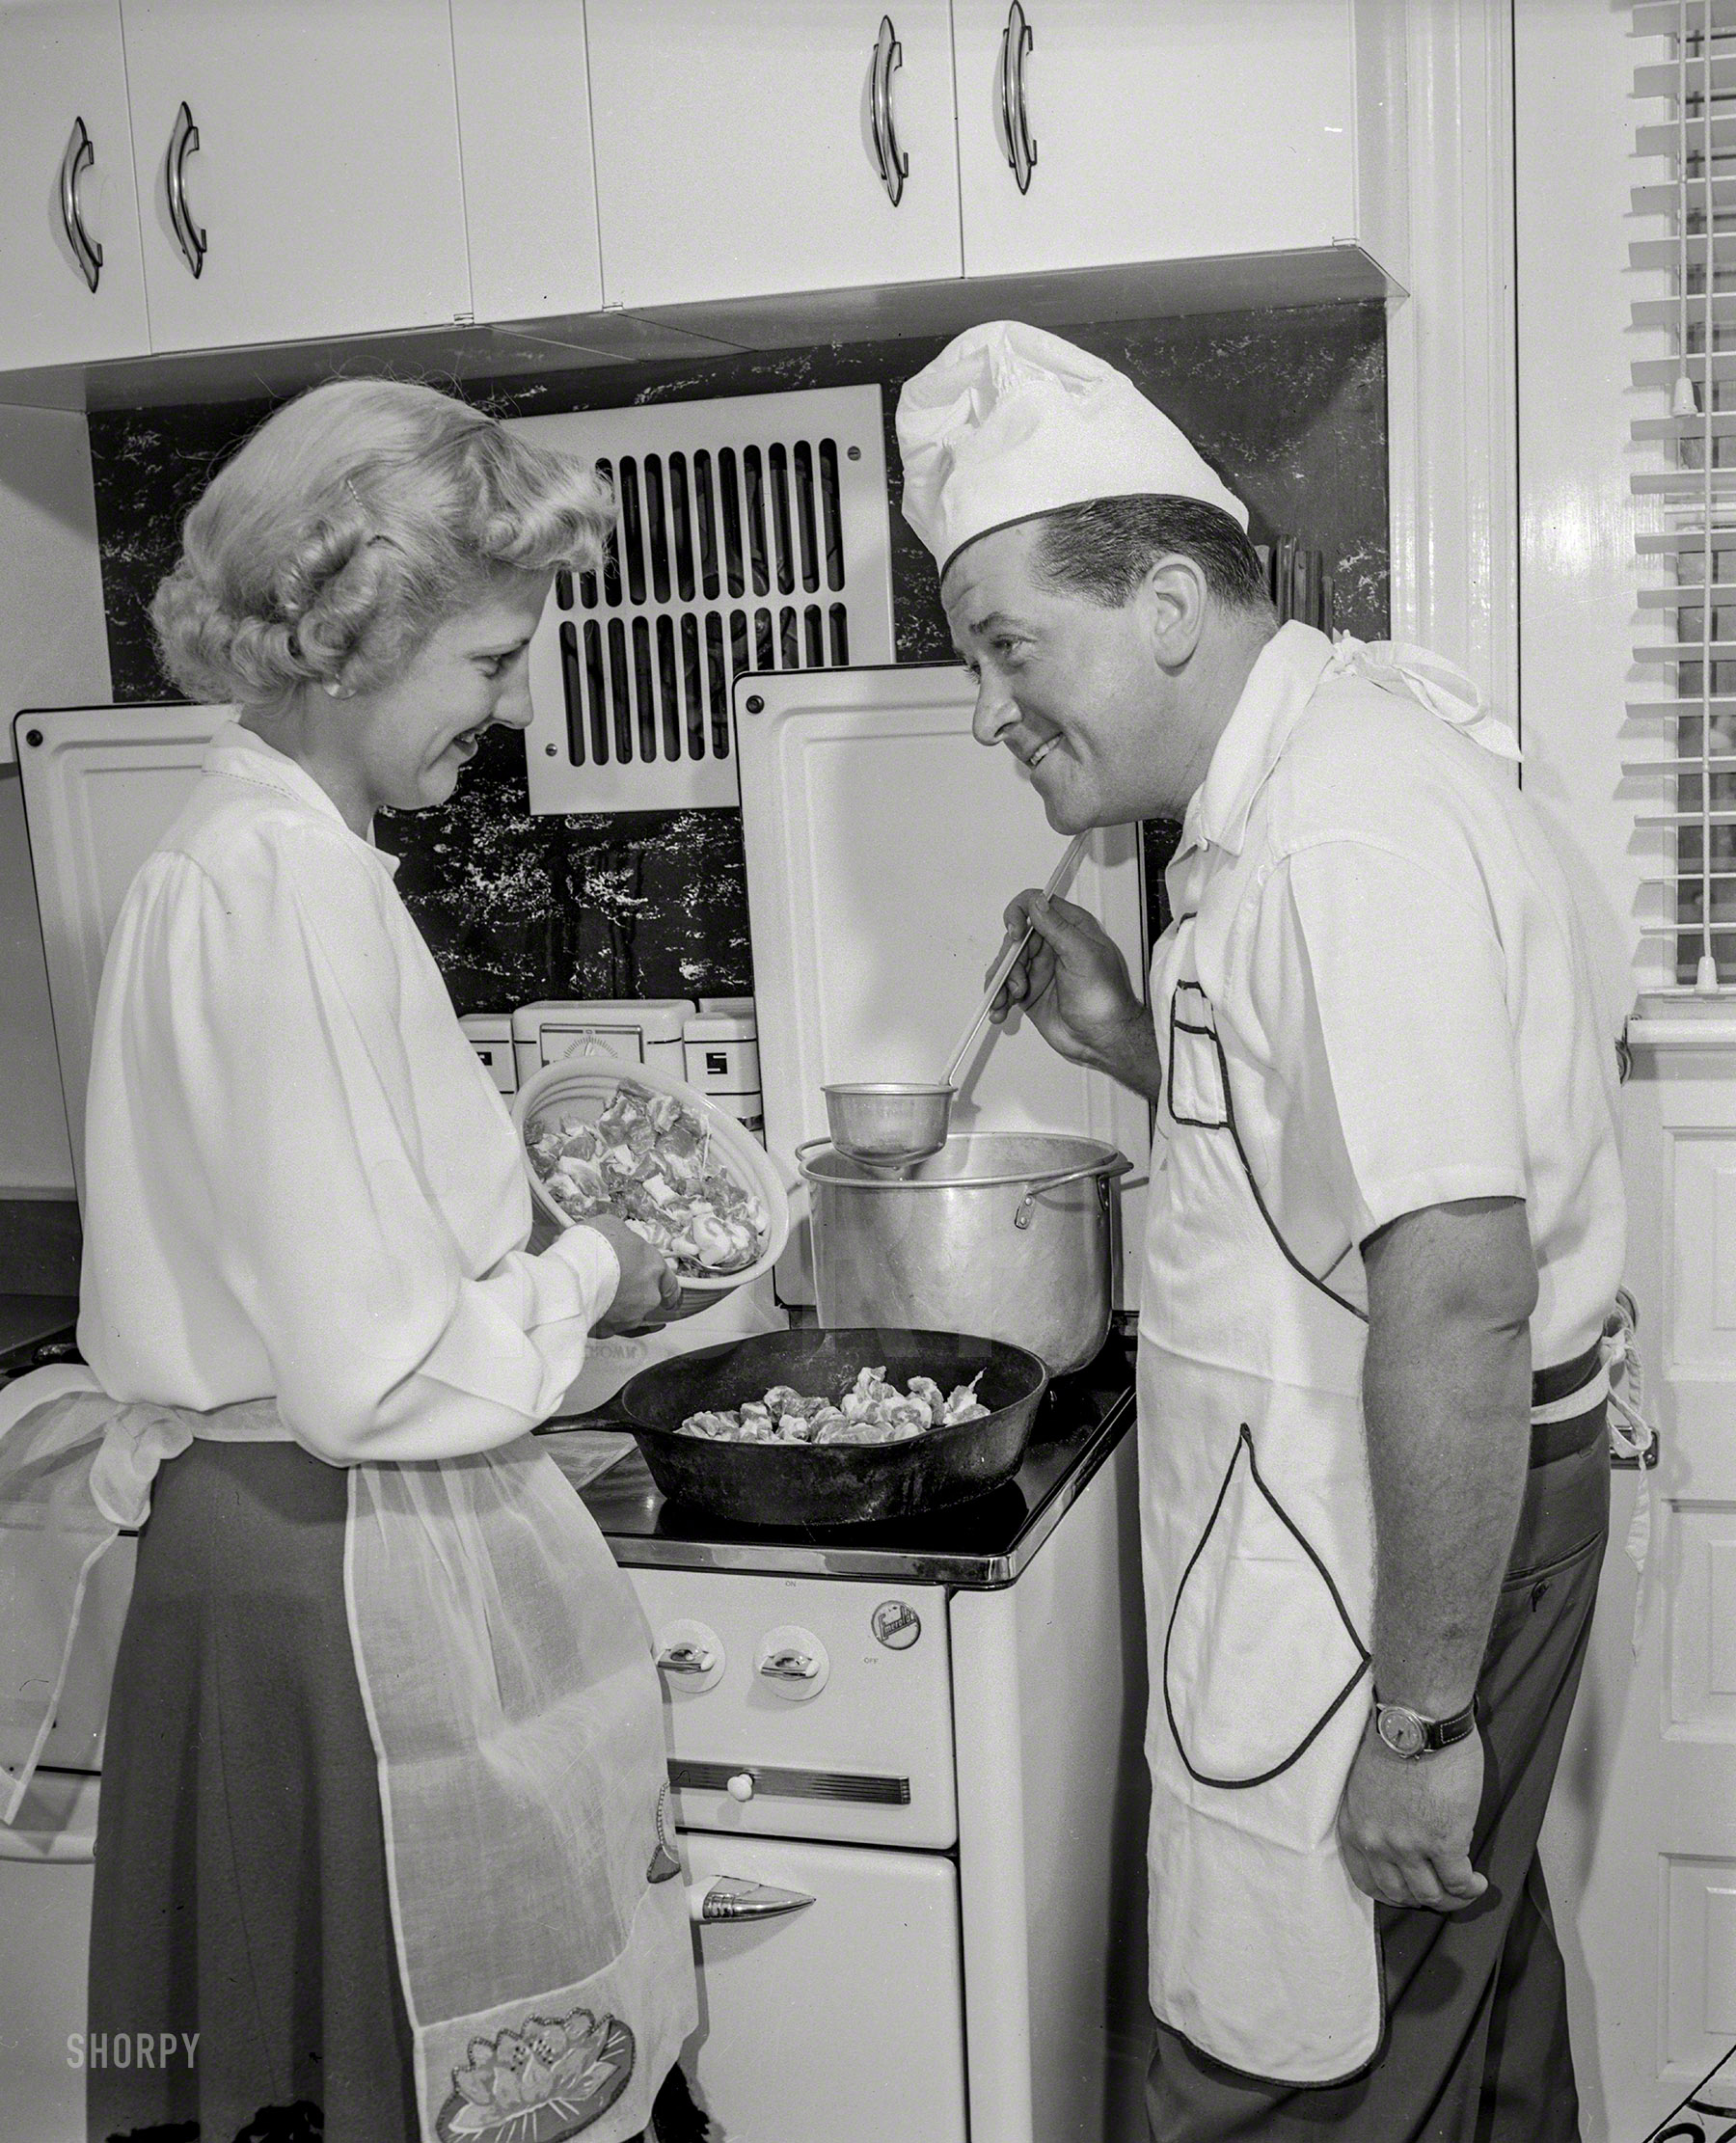 "Man and woman at stove cooking." The first of thousands of 4x5 negatives, retired from the archives of mid-century newspapers, acquired by Shorpy. Most of these are undated and have little or no caption information. If you recognize any of the subjects or locales, let us know in the Comments. View full size.
